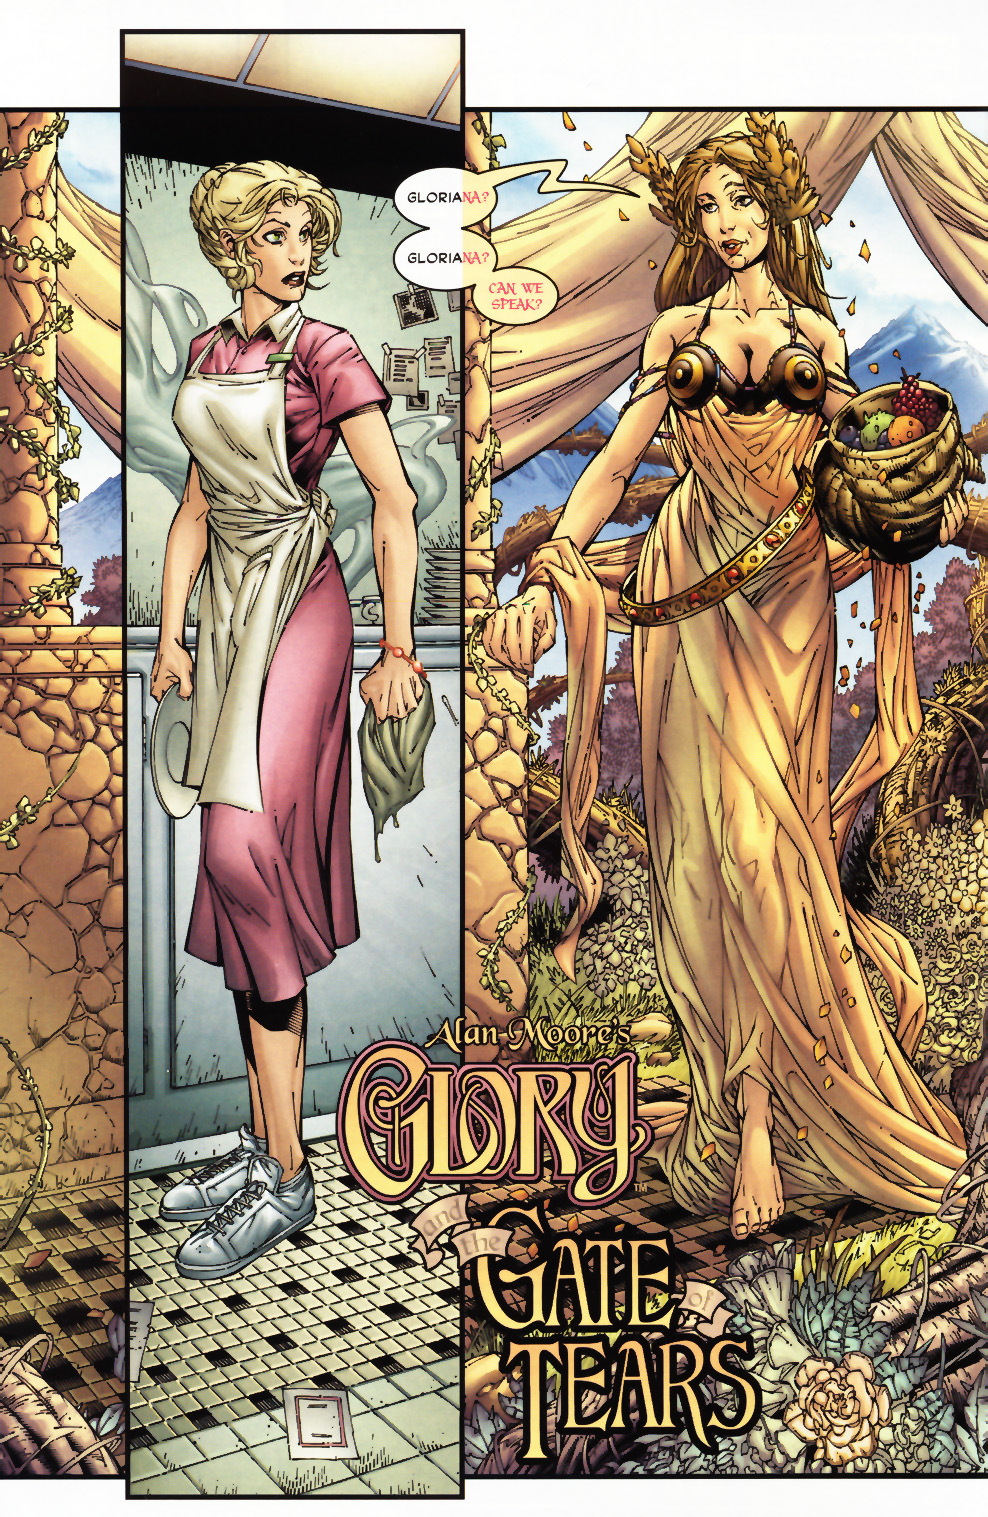 Read online Alan Moore's Glory comic -  Issue #0 - 3